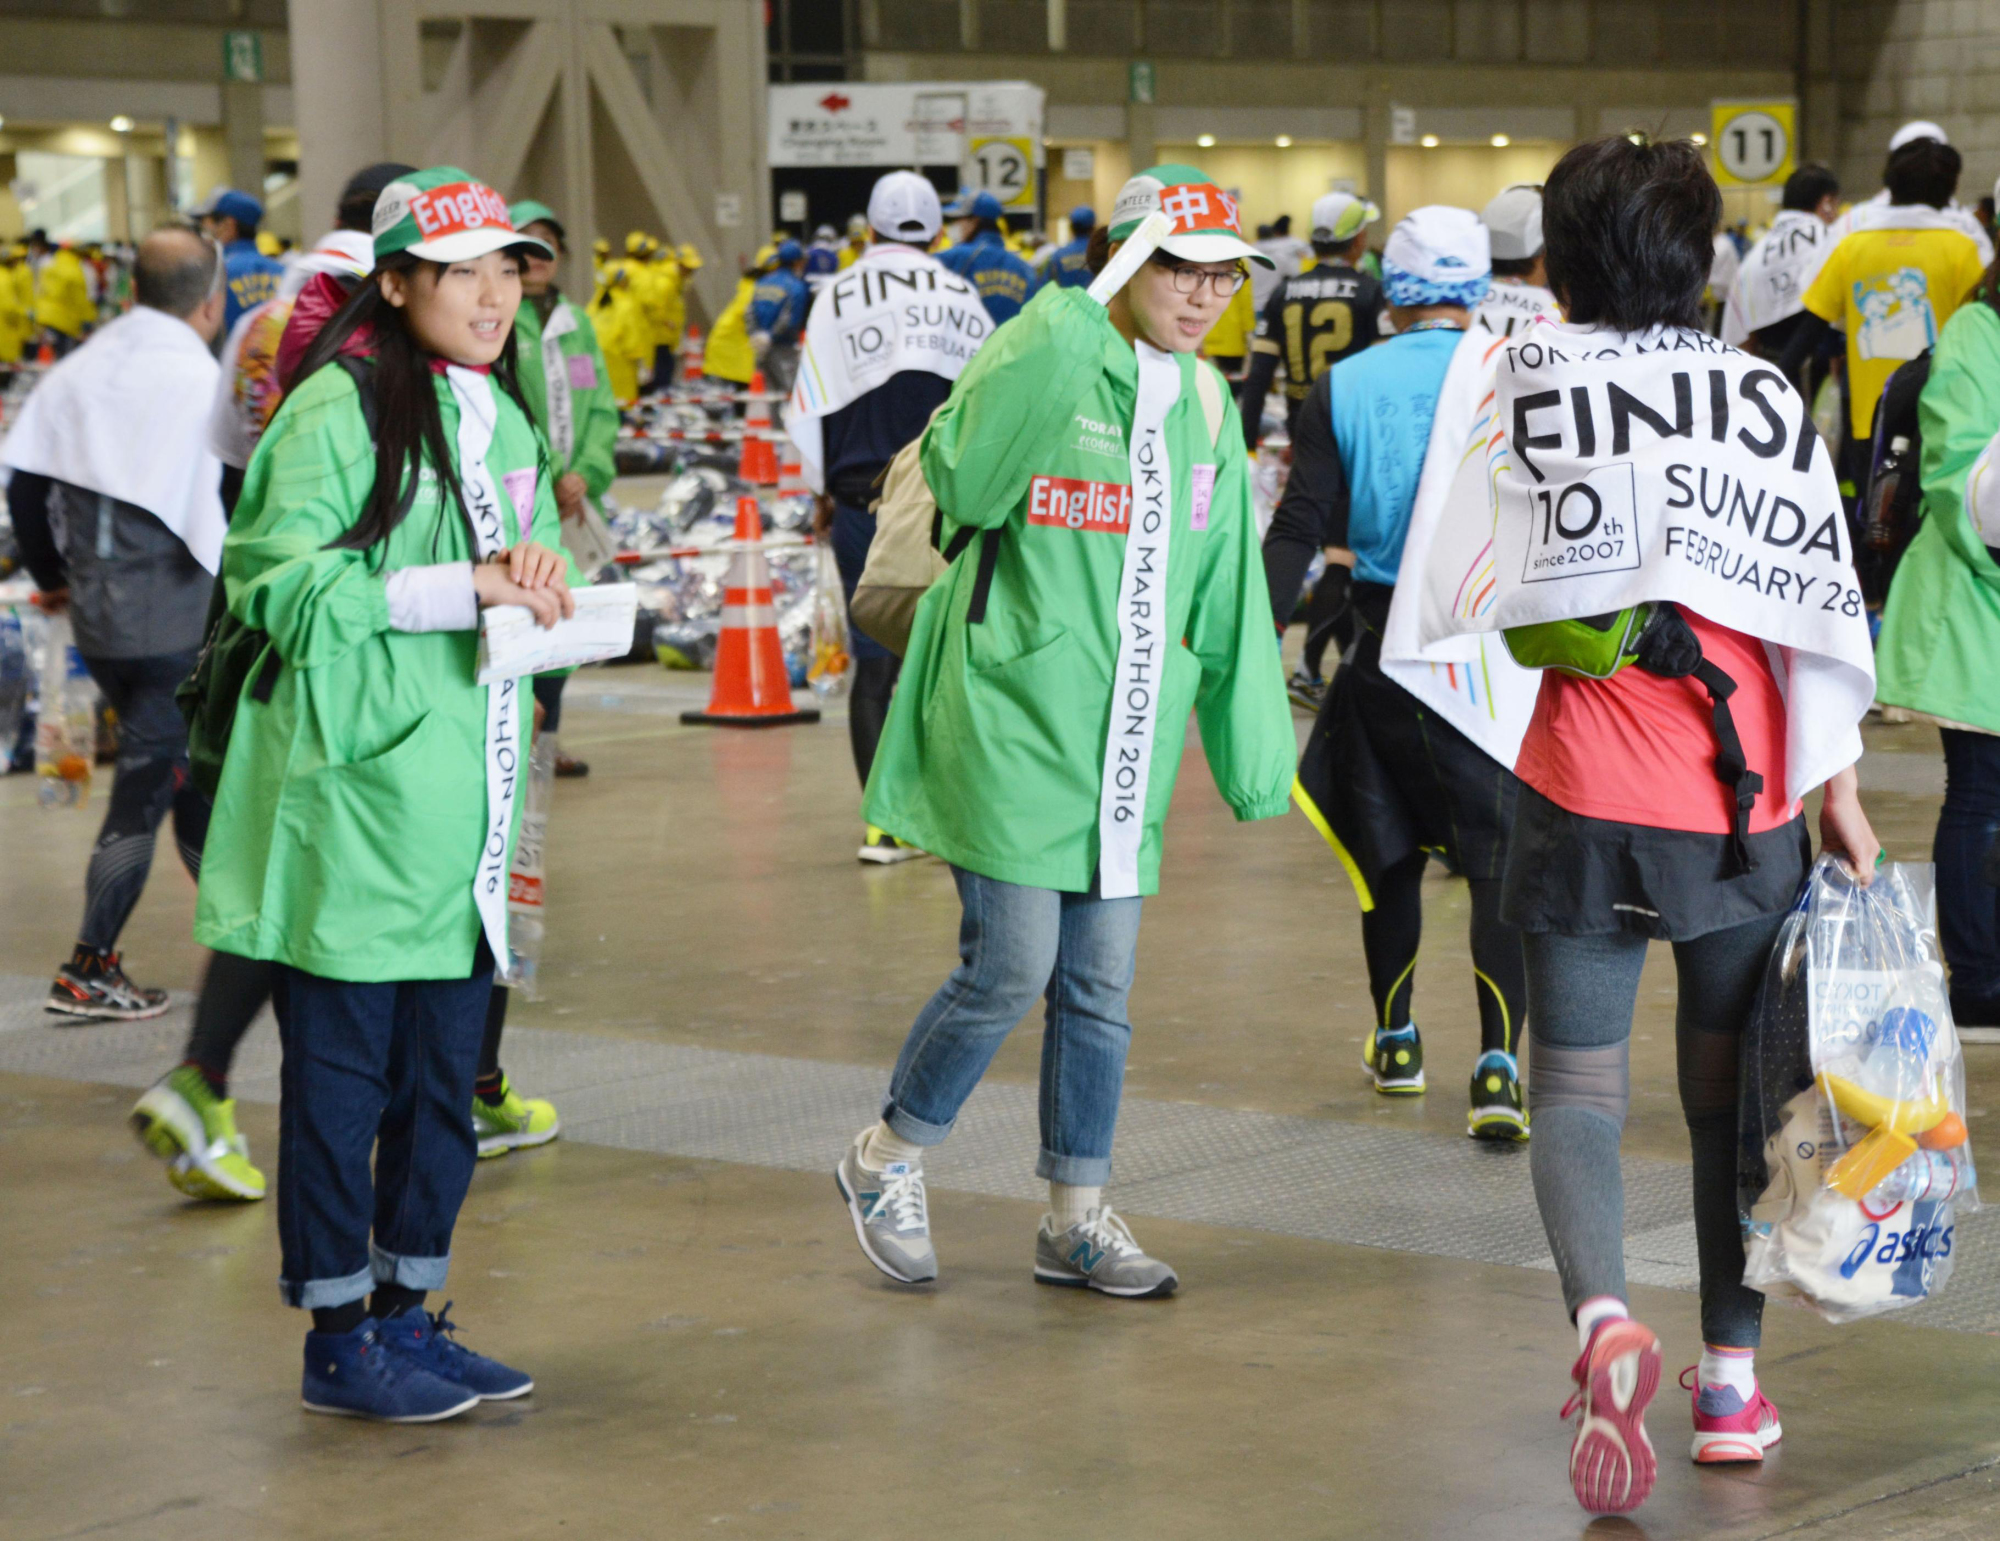 Volunteers offer linguistic support for foreigners who participated in the Tokyo Marathon in February 2016. Japan is struggling to overcome language and cultural barriers as Tokyo gears up for the 2020 Olympics and Paralympics. | KYODO